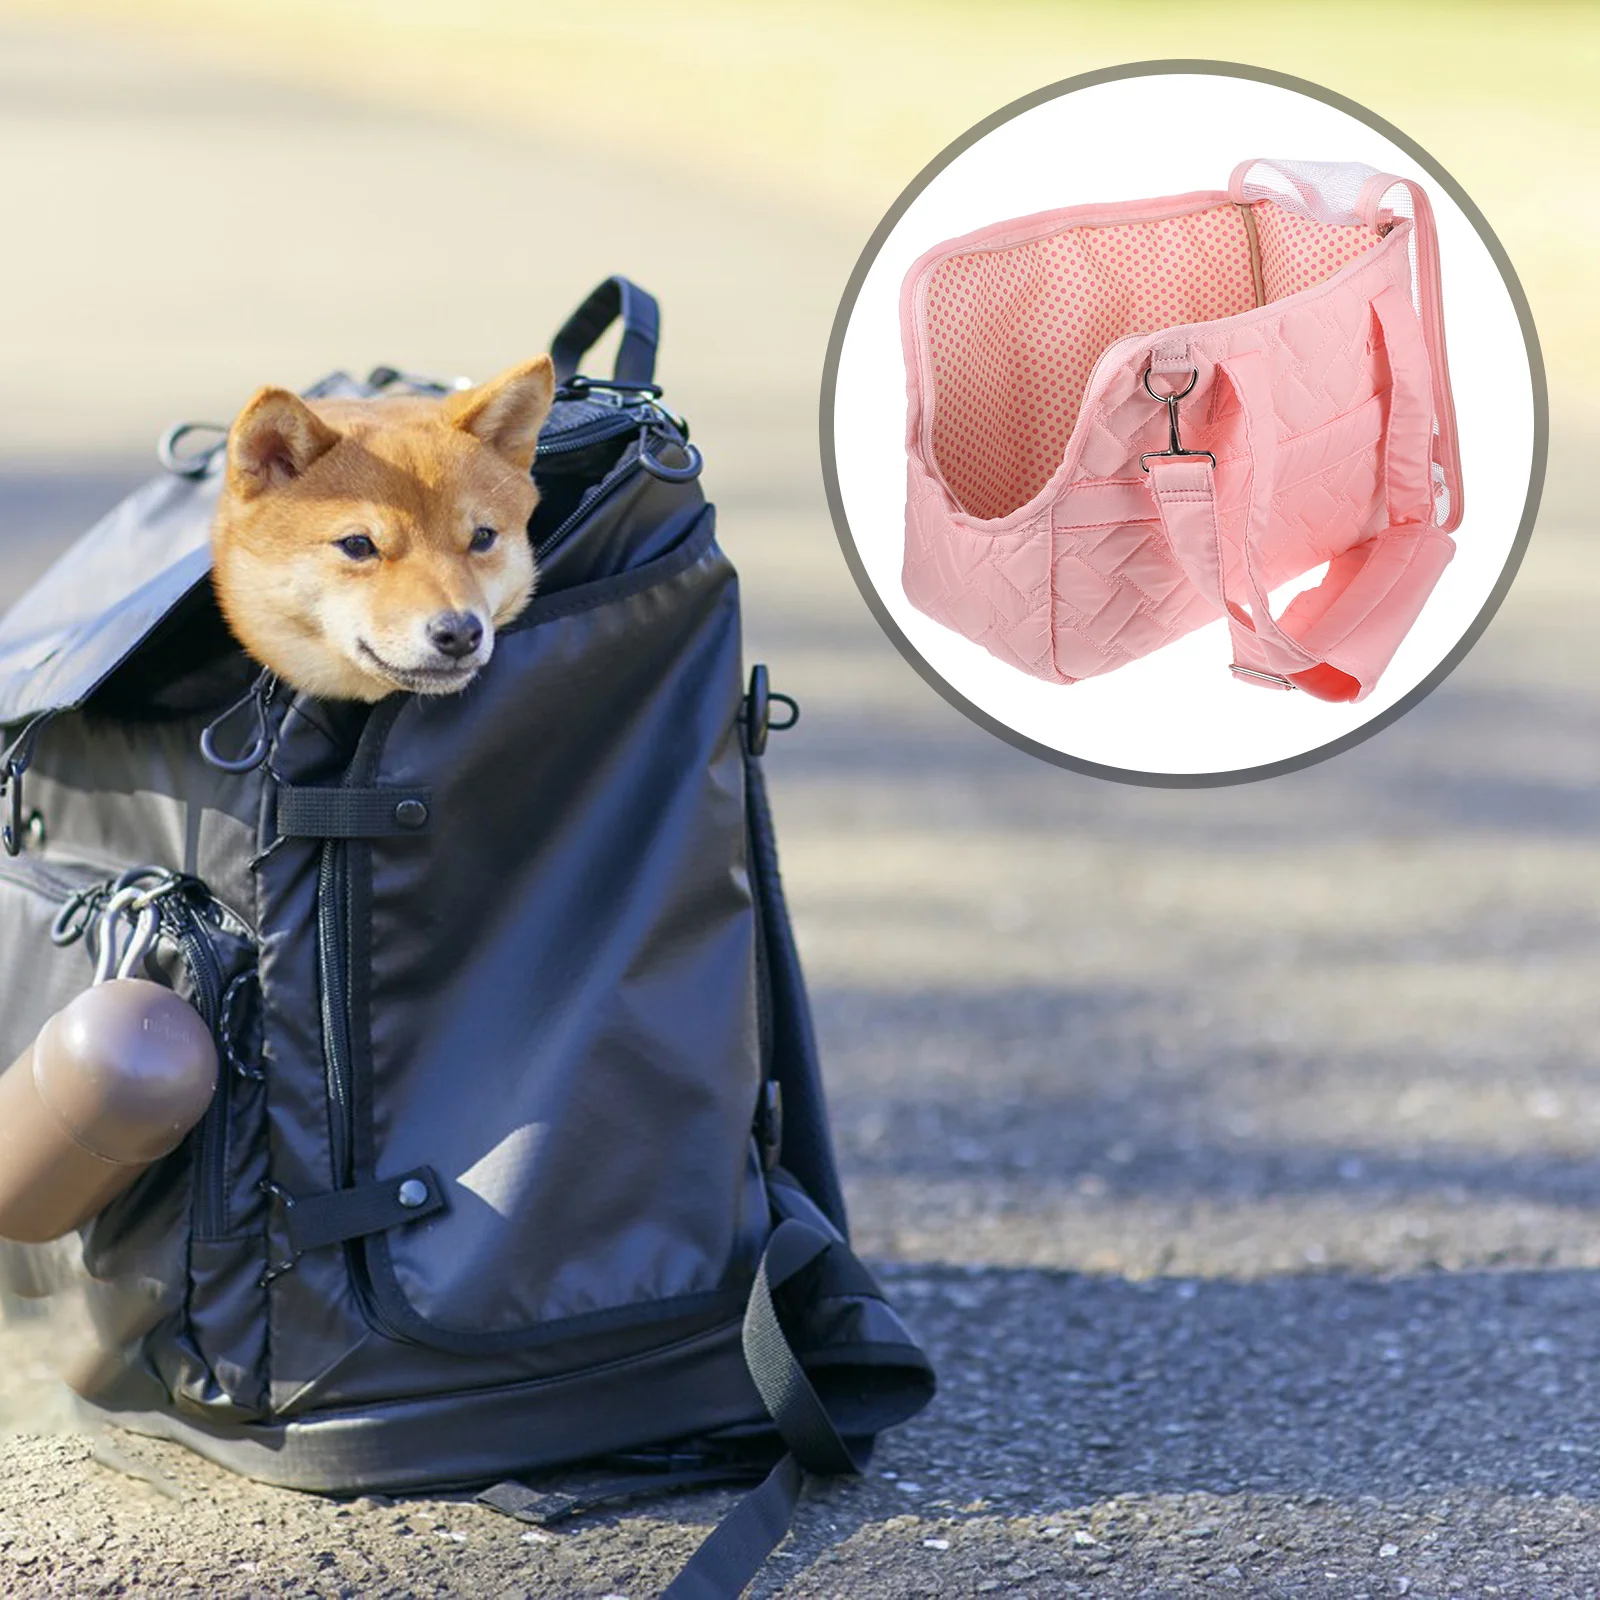 

Pet Bag with Pocket Portable Pouch Collapsible Cat Carrier Large Storage Dog Carrying Travel Outdoor Duffle for